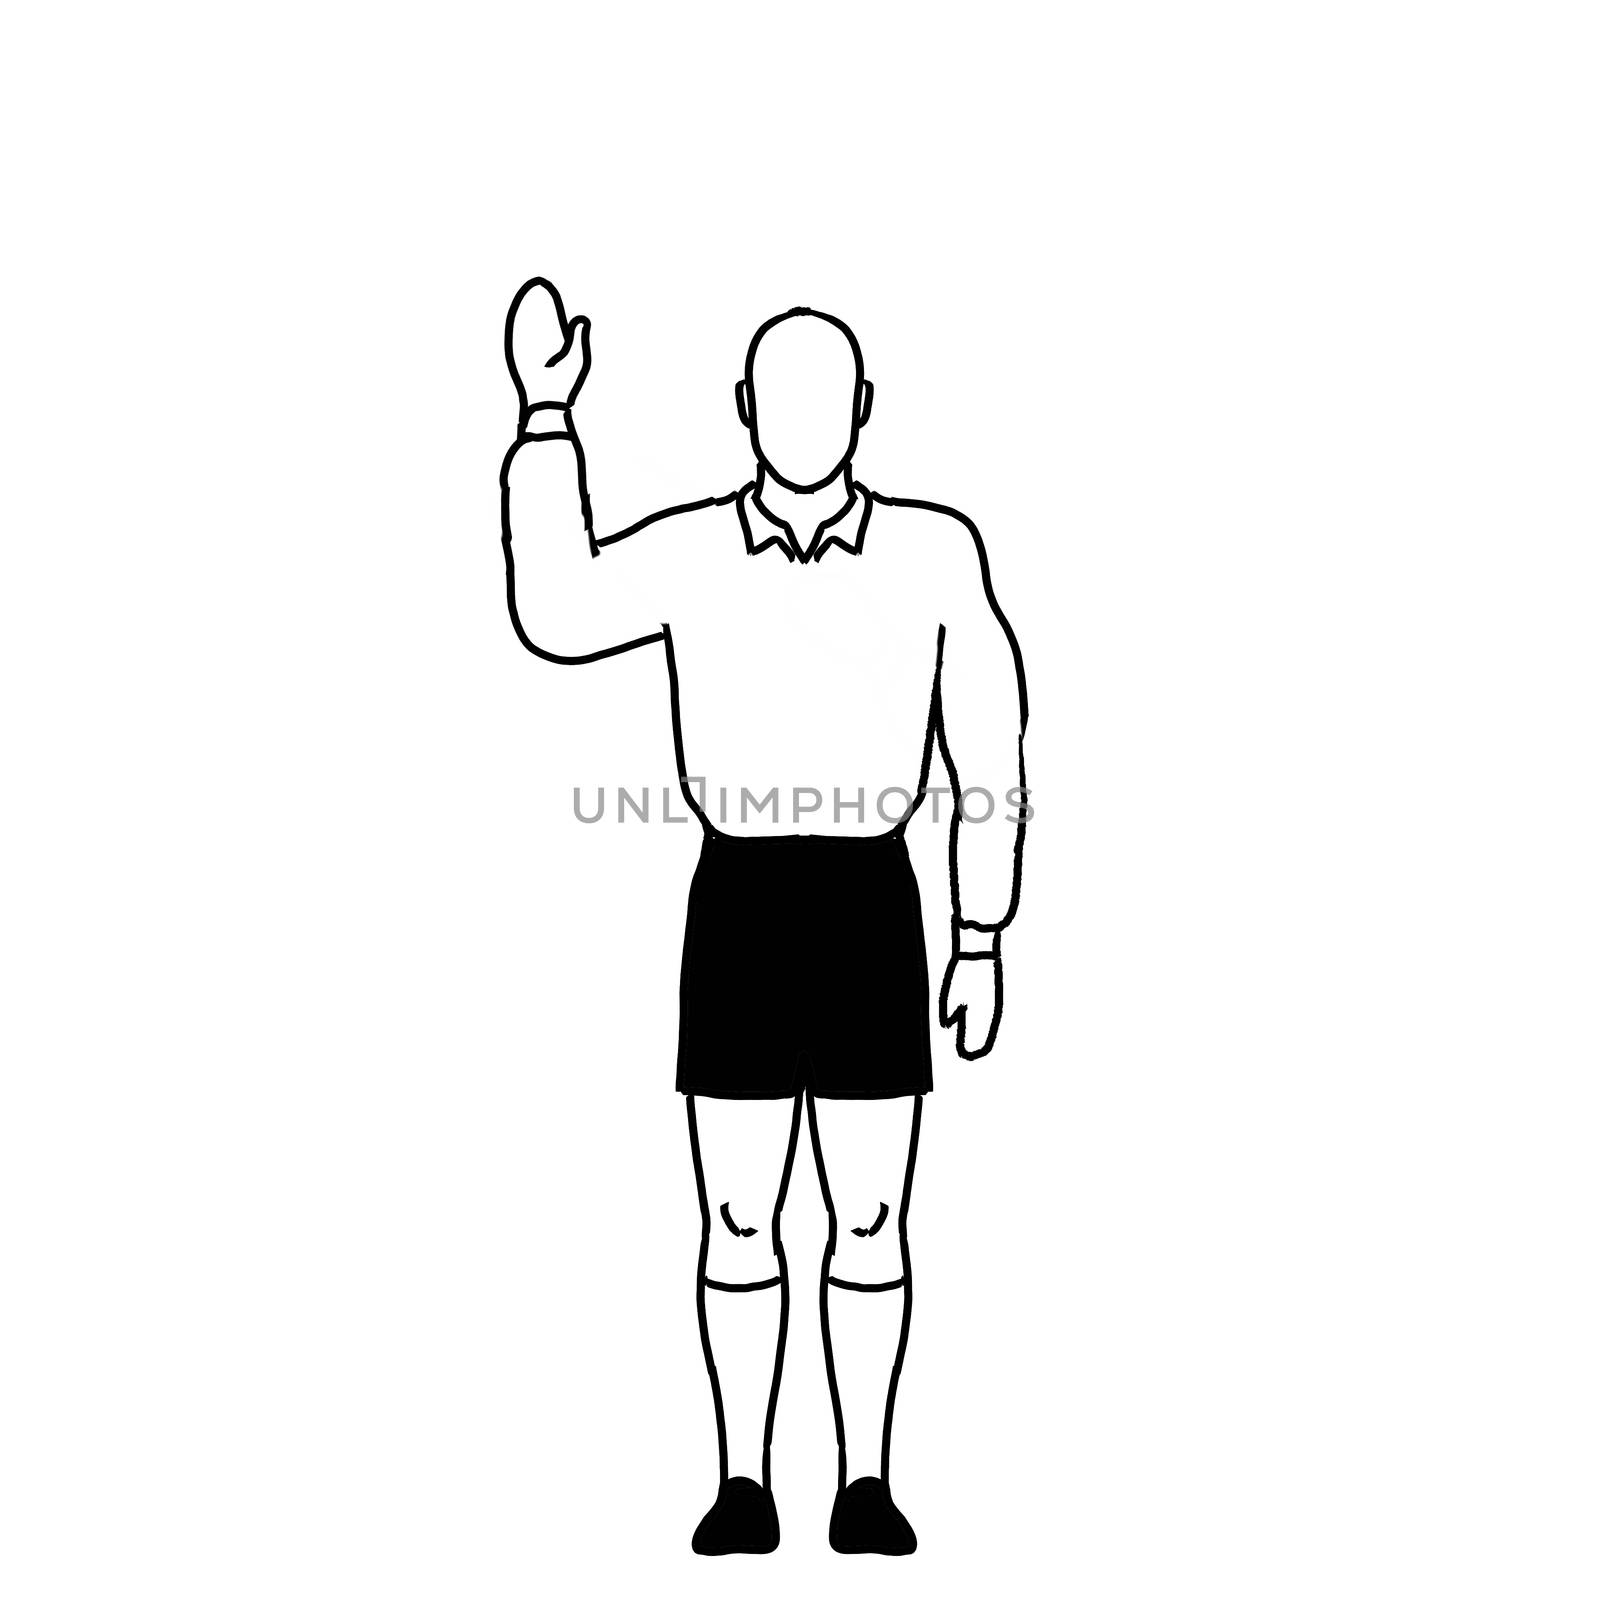 Rugby Referee penalty free kick Hand Signal Drawing Retro by patrimonio